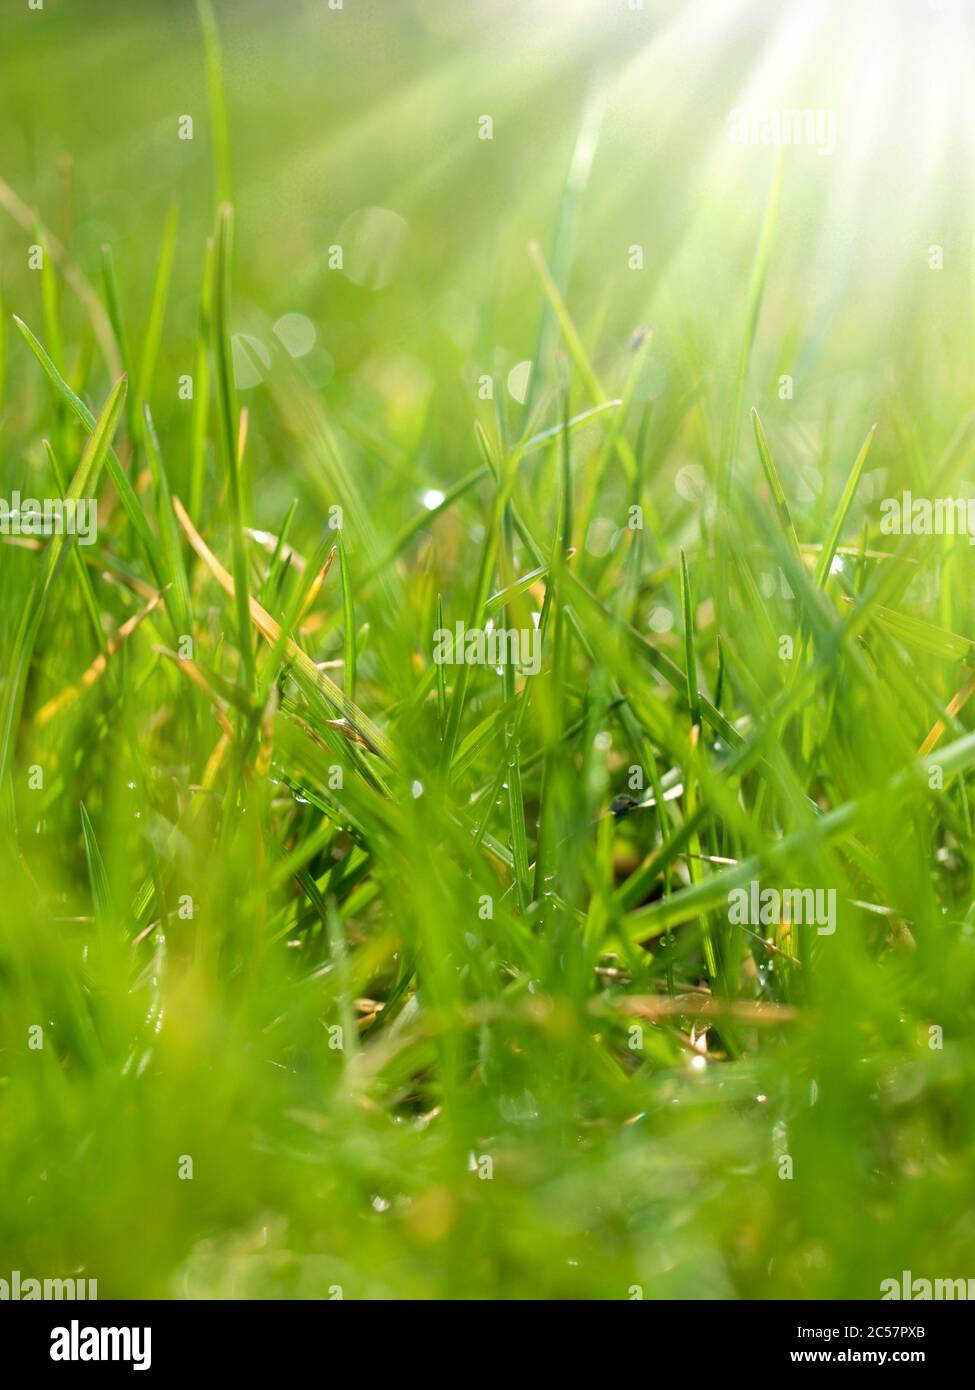 selective focus shot of young green grass great as background Stock Photo